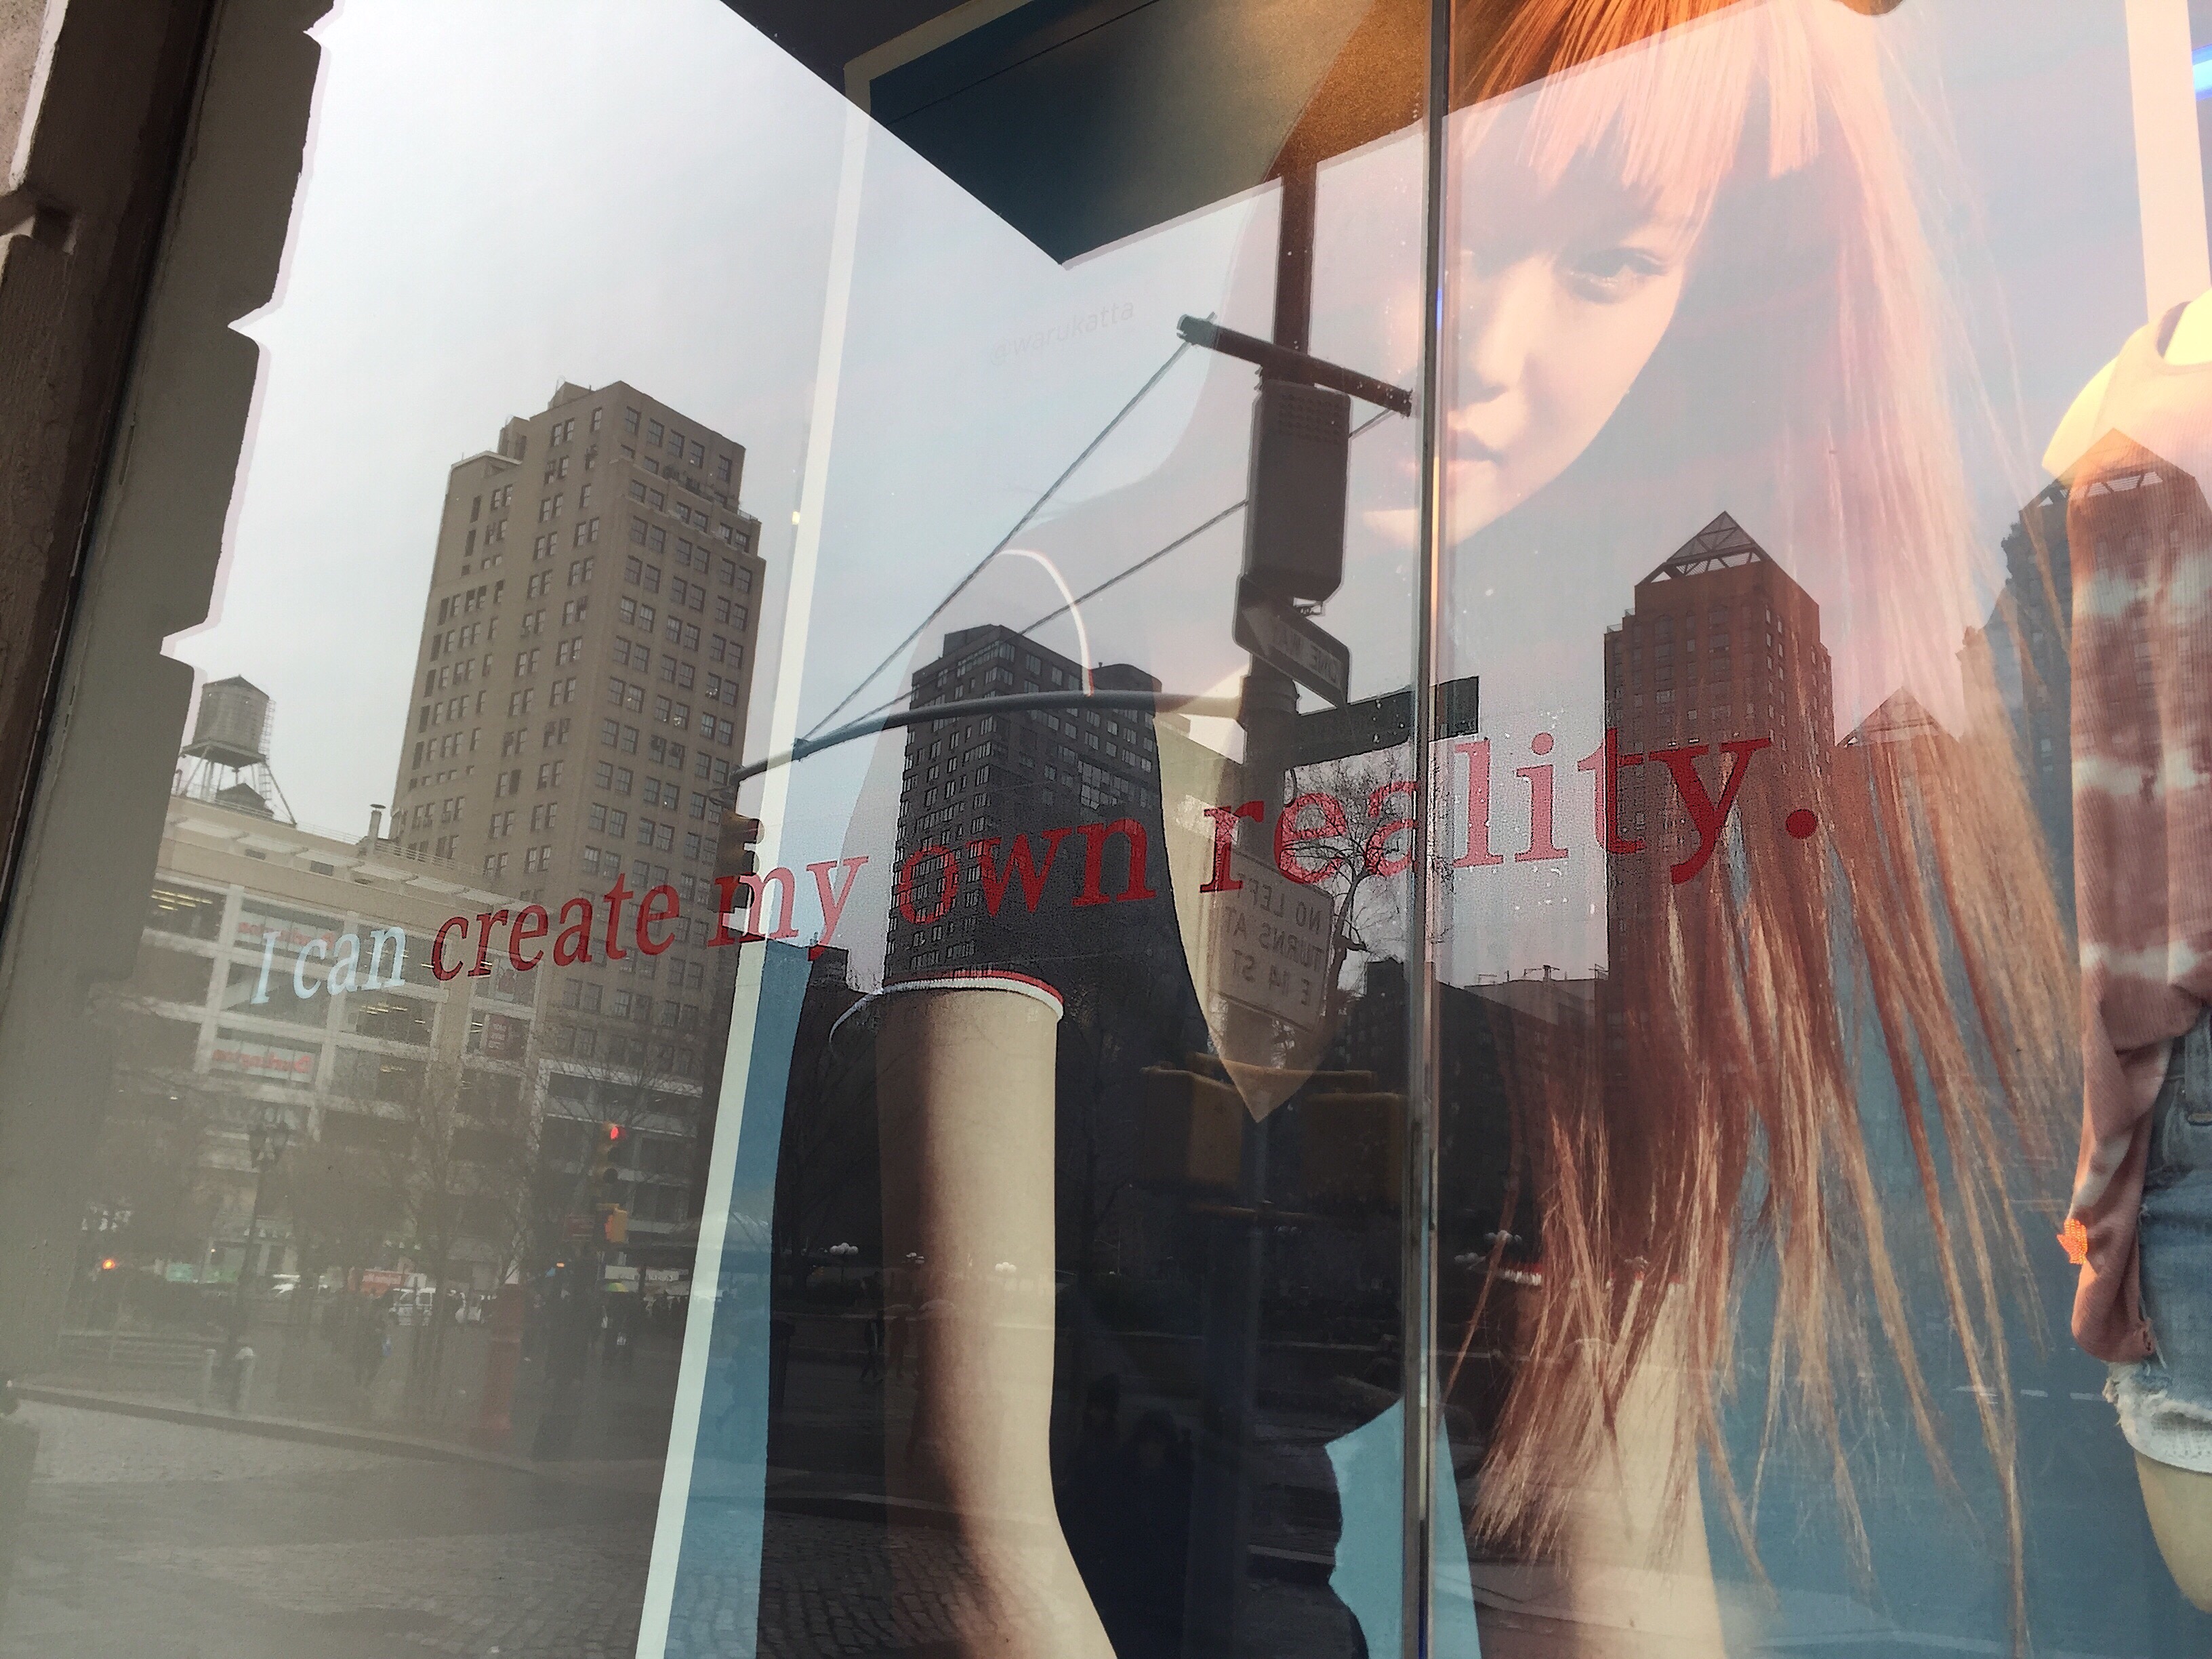 Window Display with Slogan “I Can Create My Own Reality”